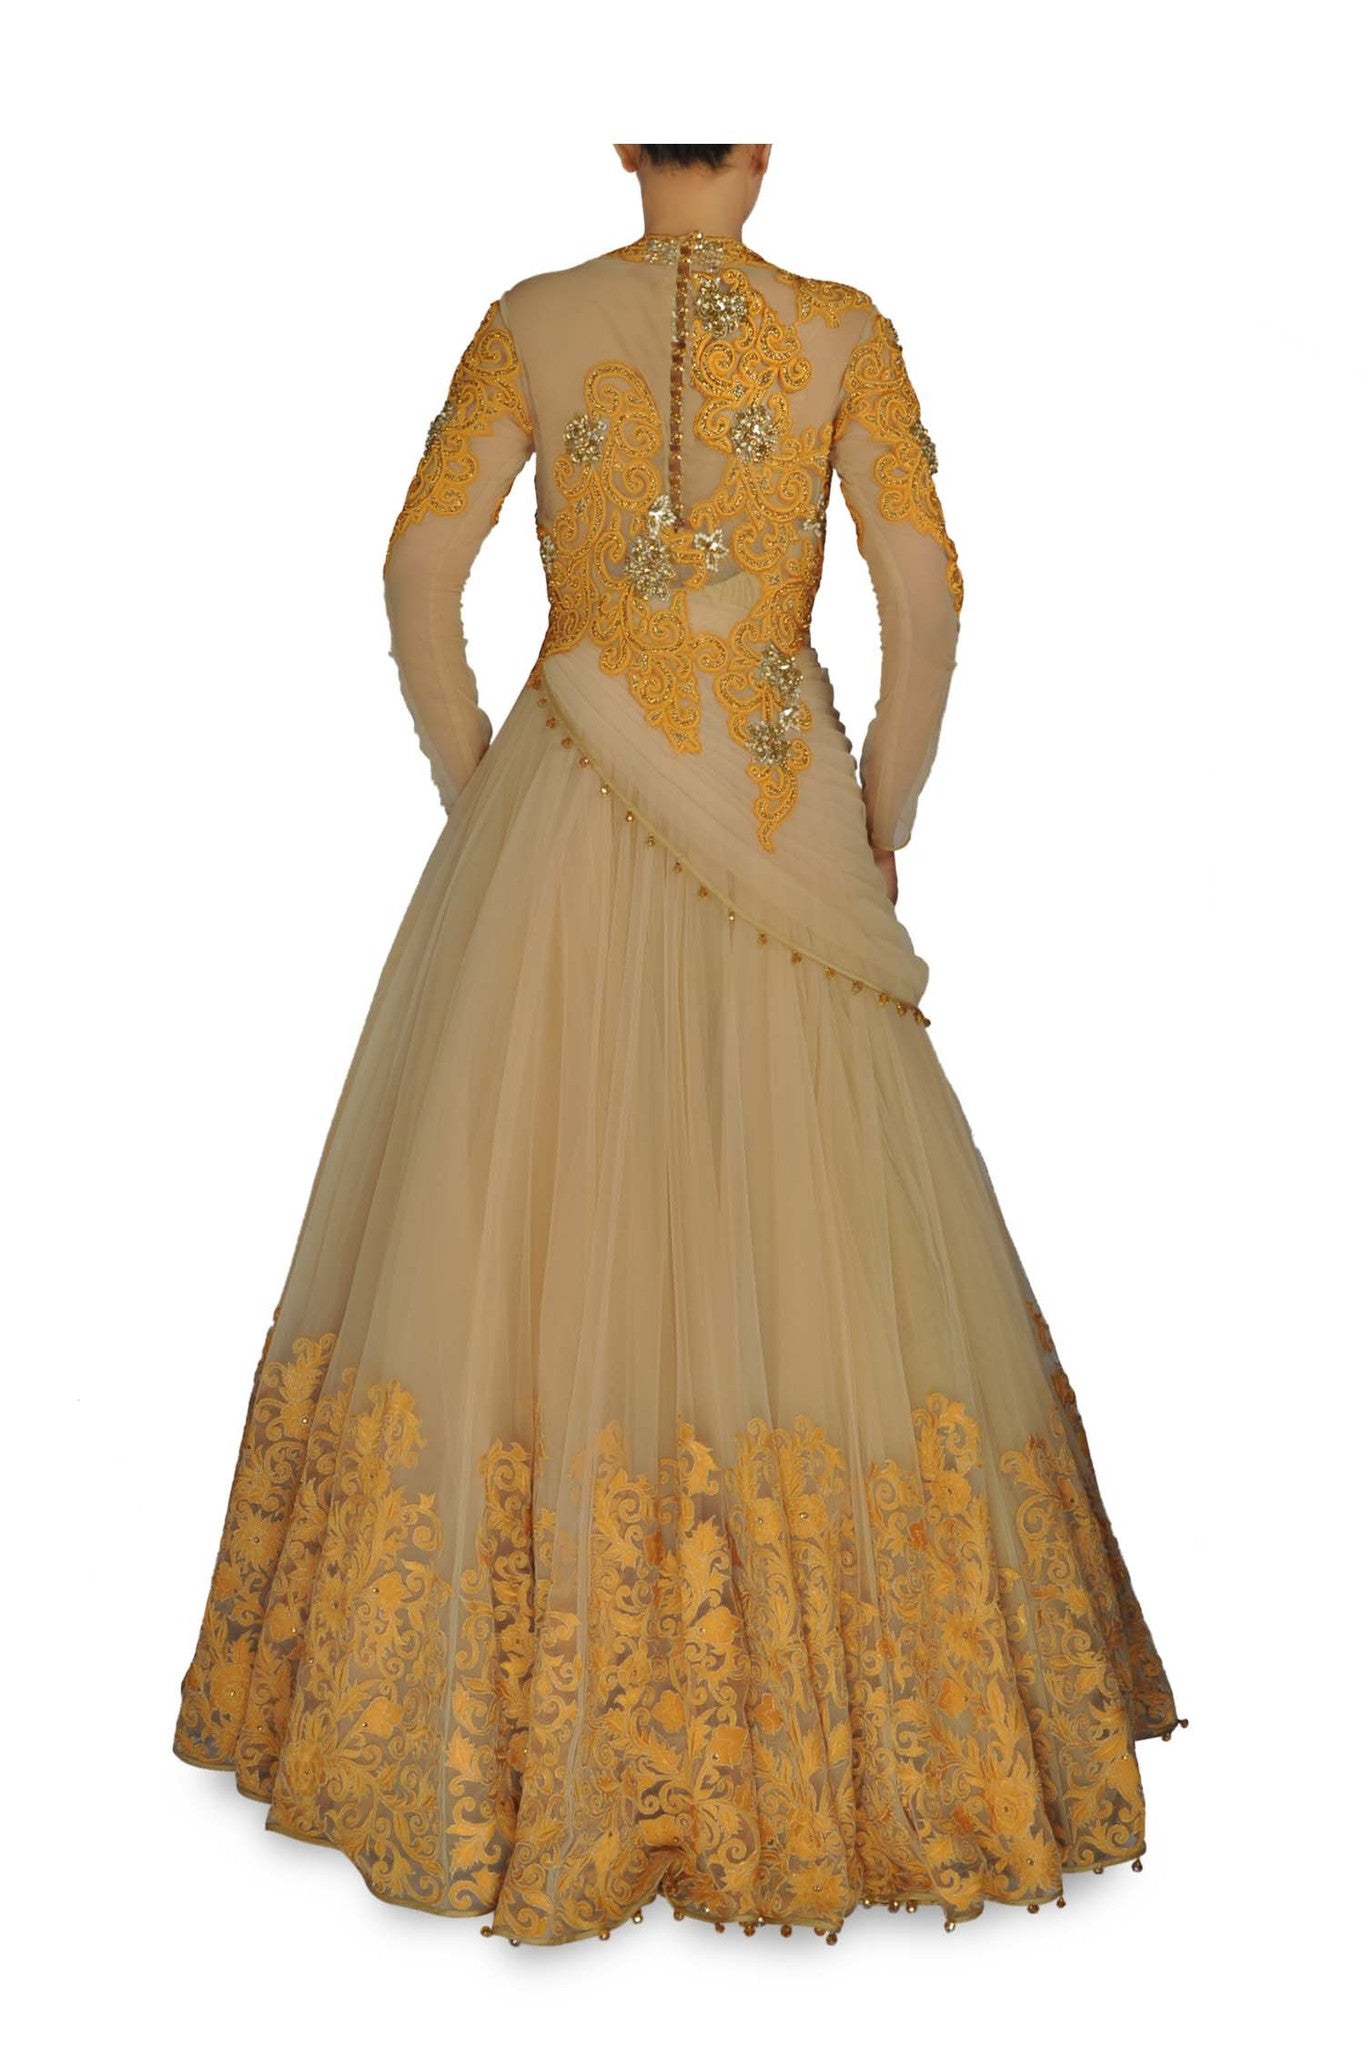 Stylish Party Wear Indo Western Gown Haldi Ceremony Yellow Outfit